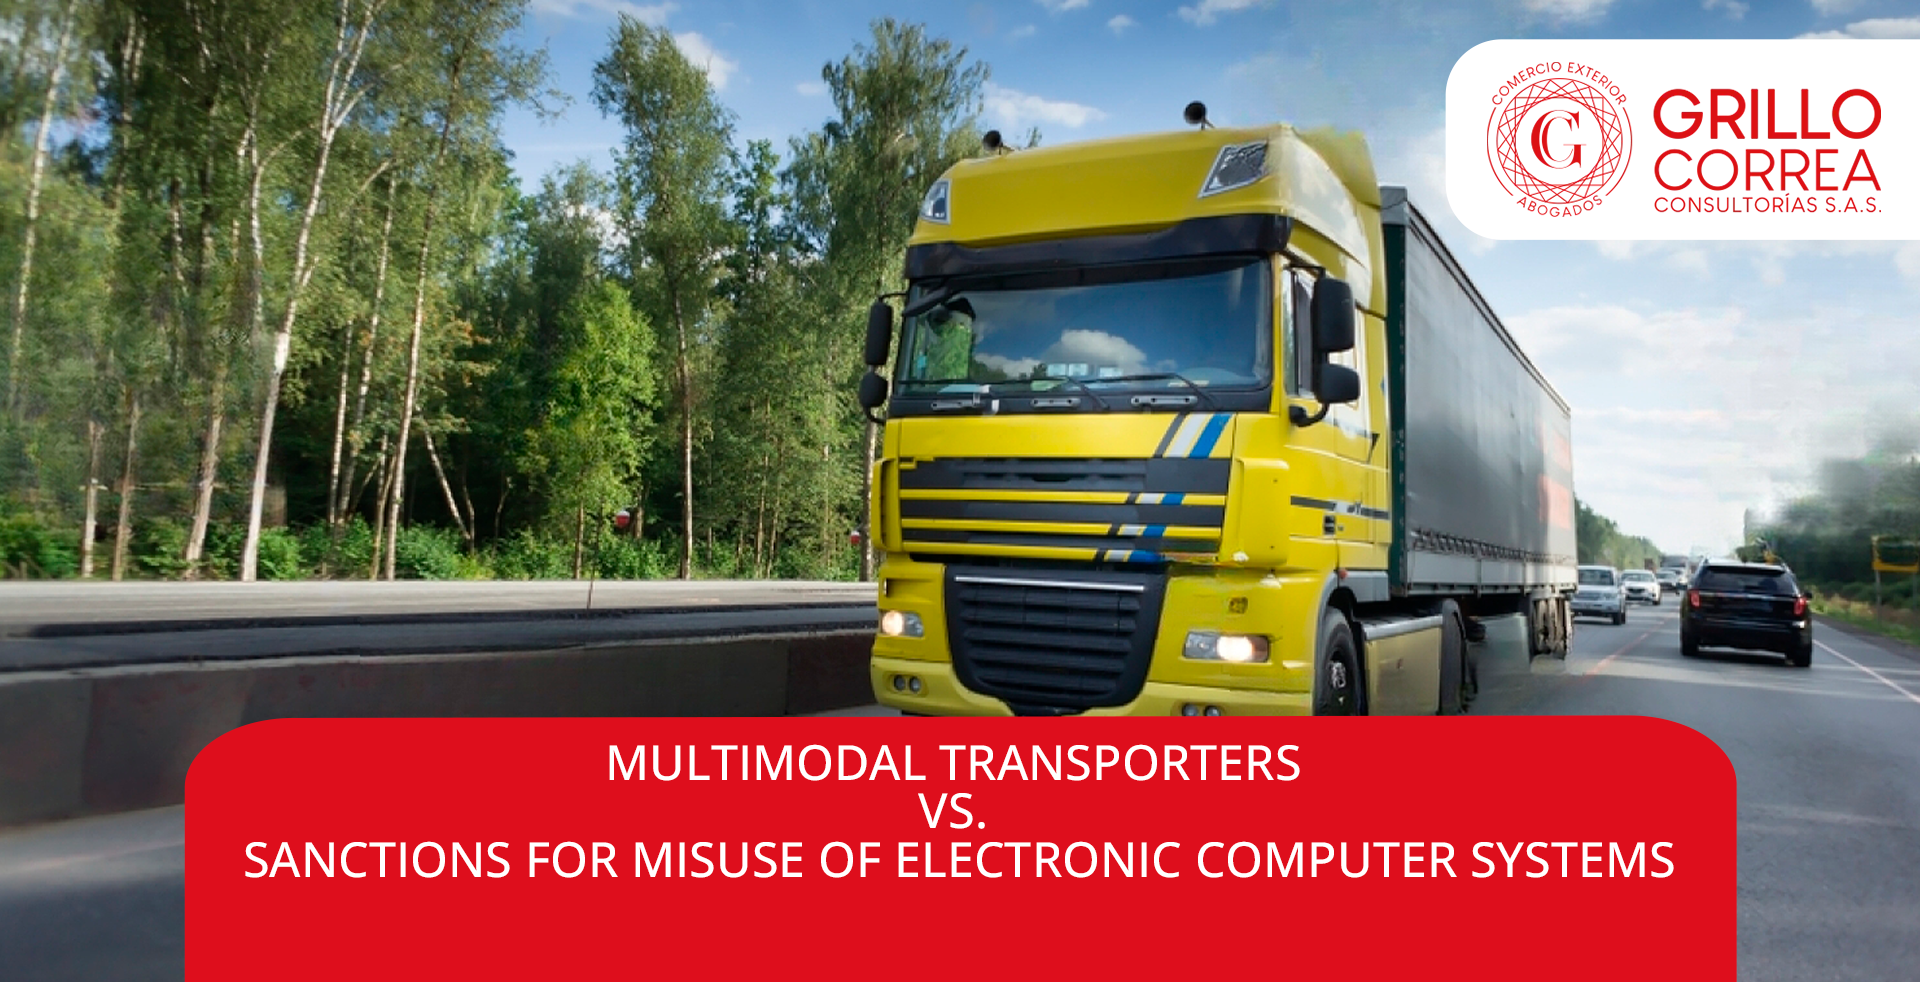 MULTIMODAL TRANSPORTERS VS SANCTIONS FOR MISUSE OF ELECTRONIC COMPUTER SYSTEMS